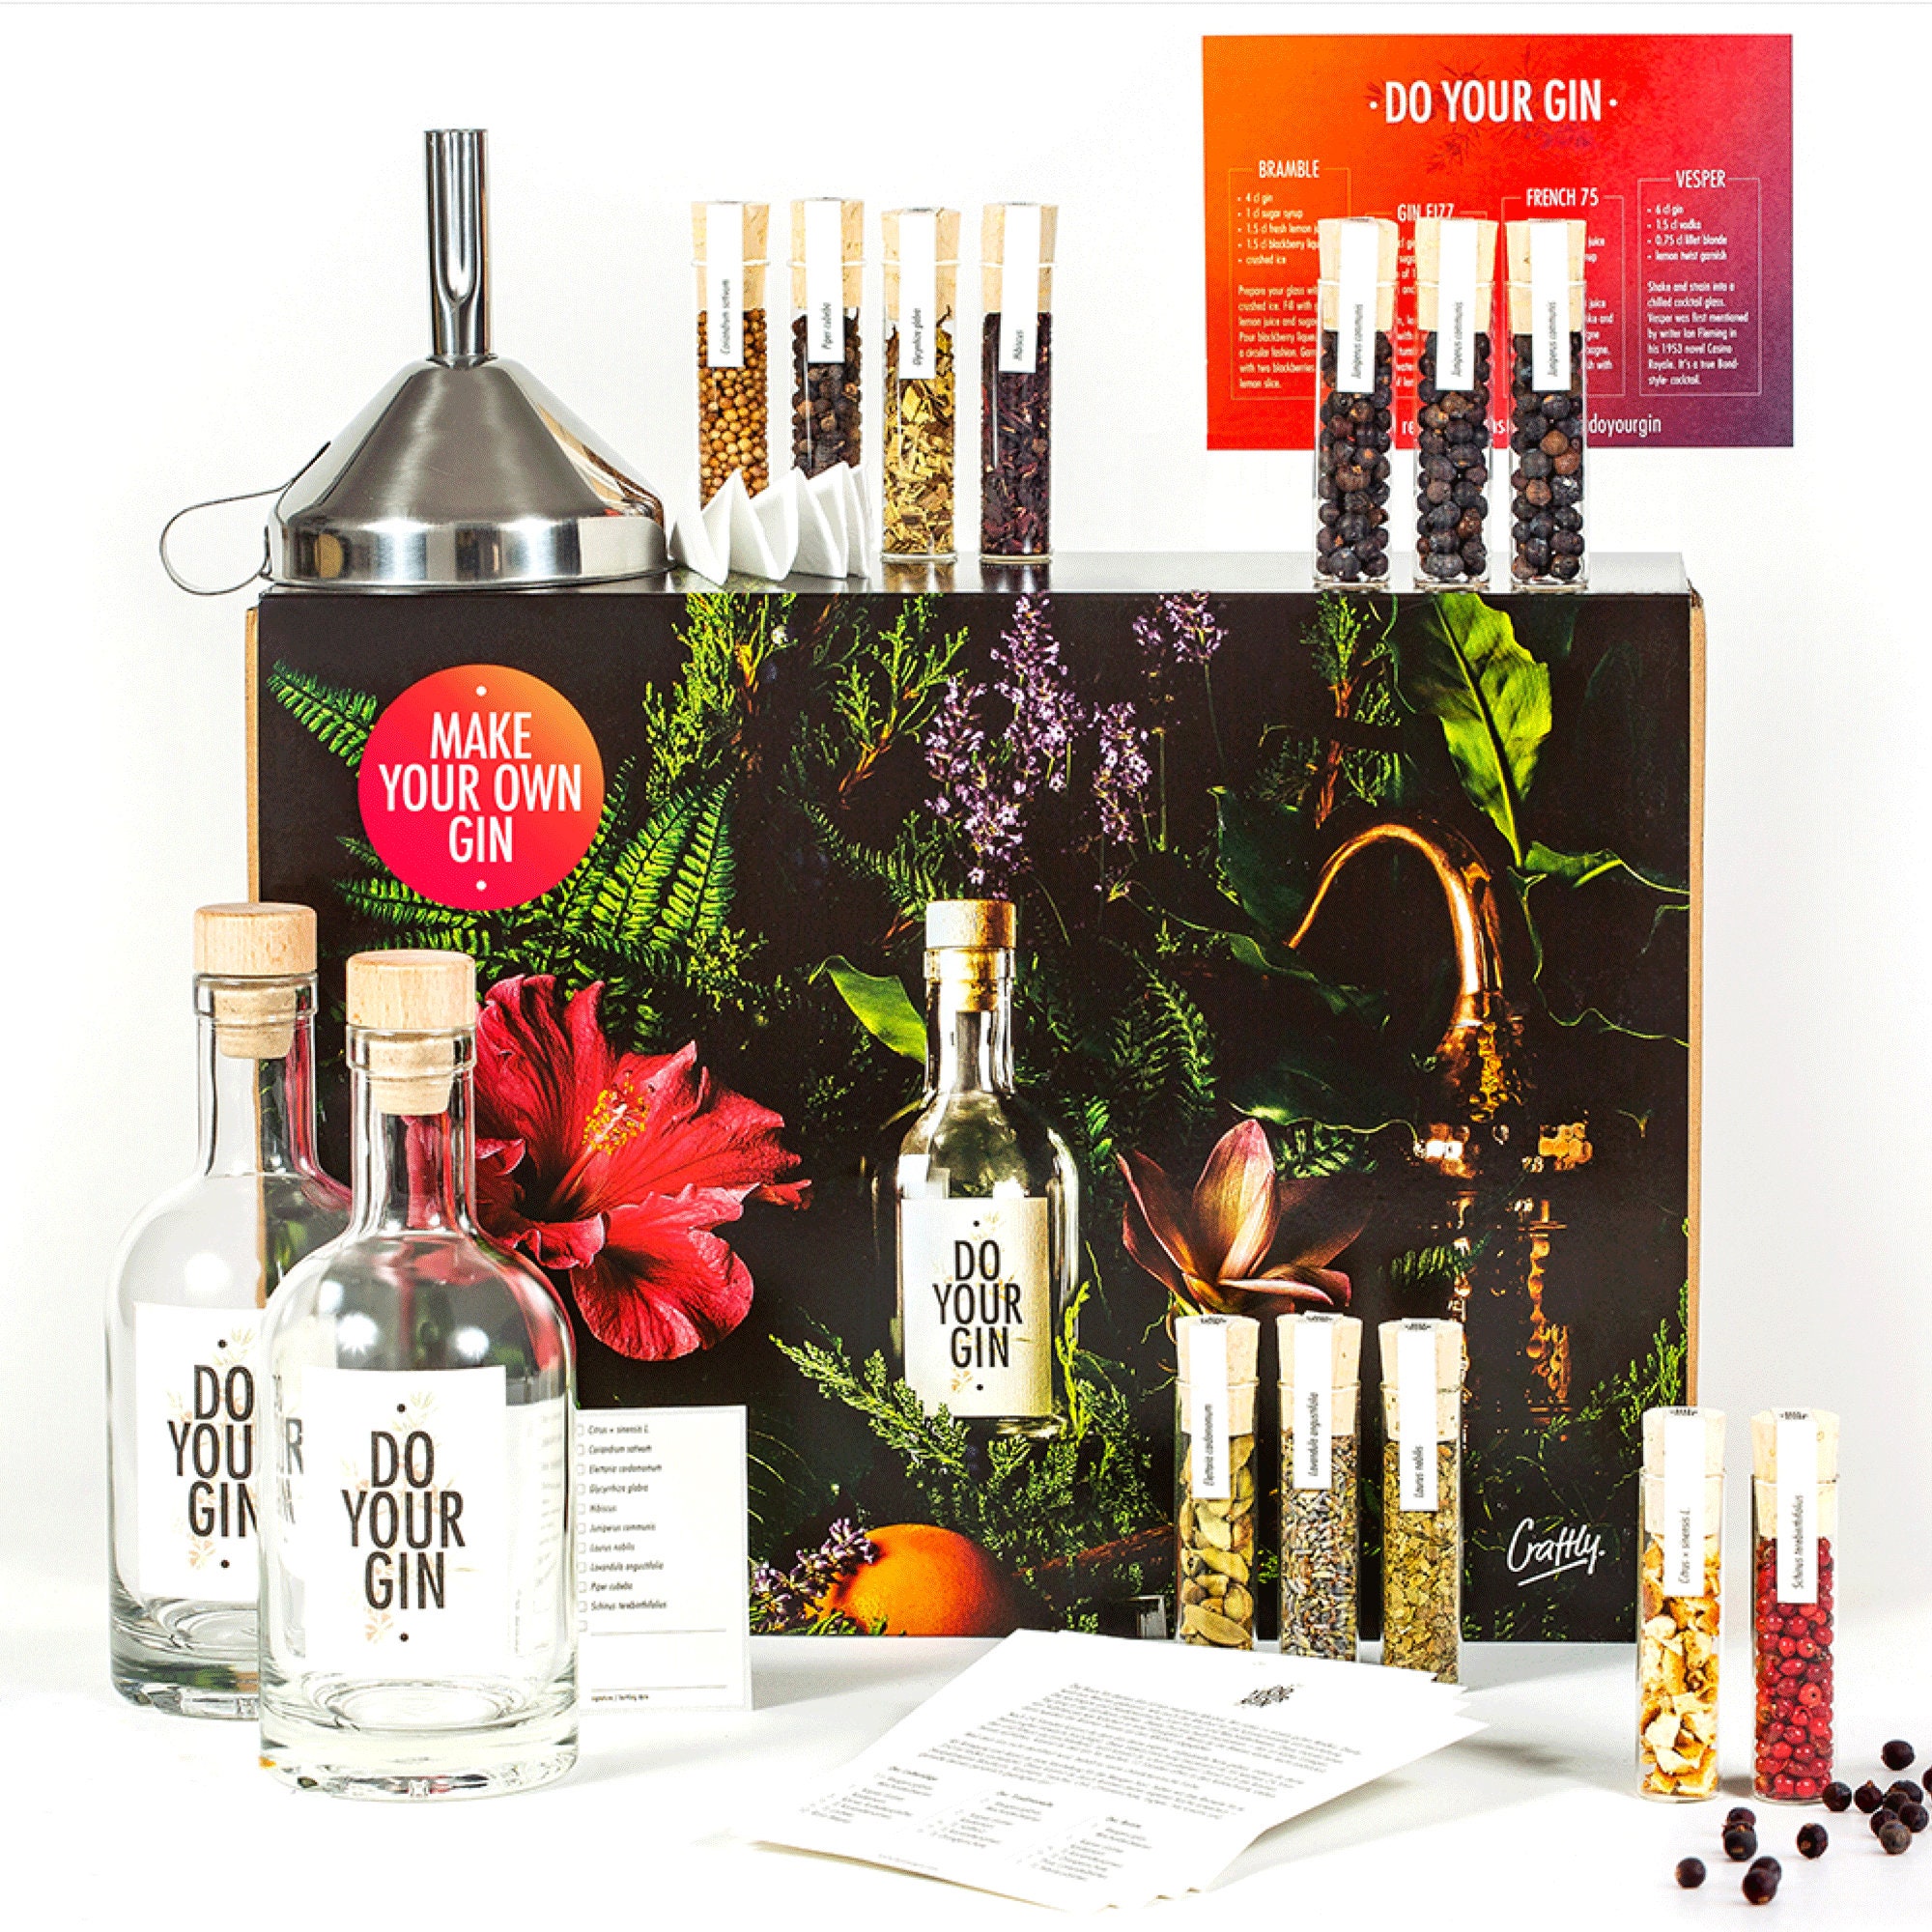 Do Your Gin Set - make your own craft gin